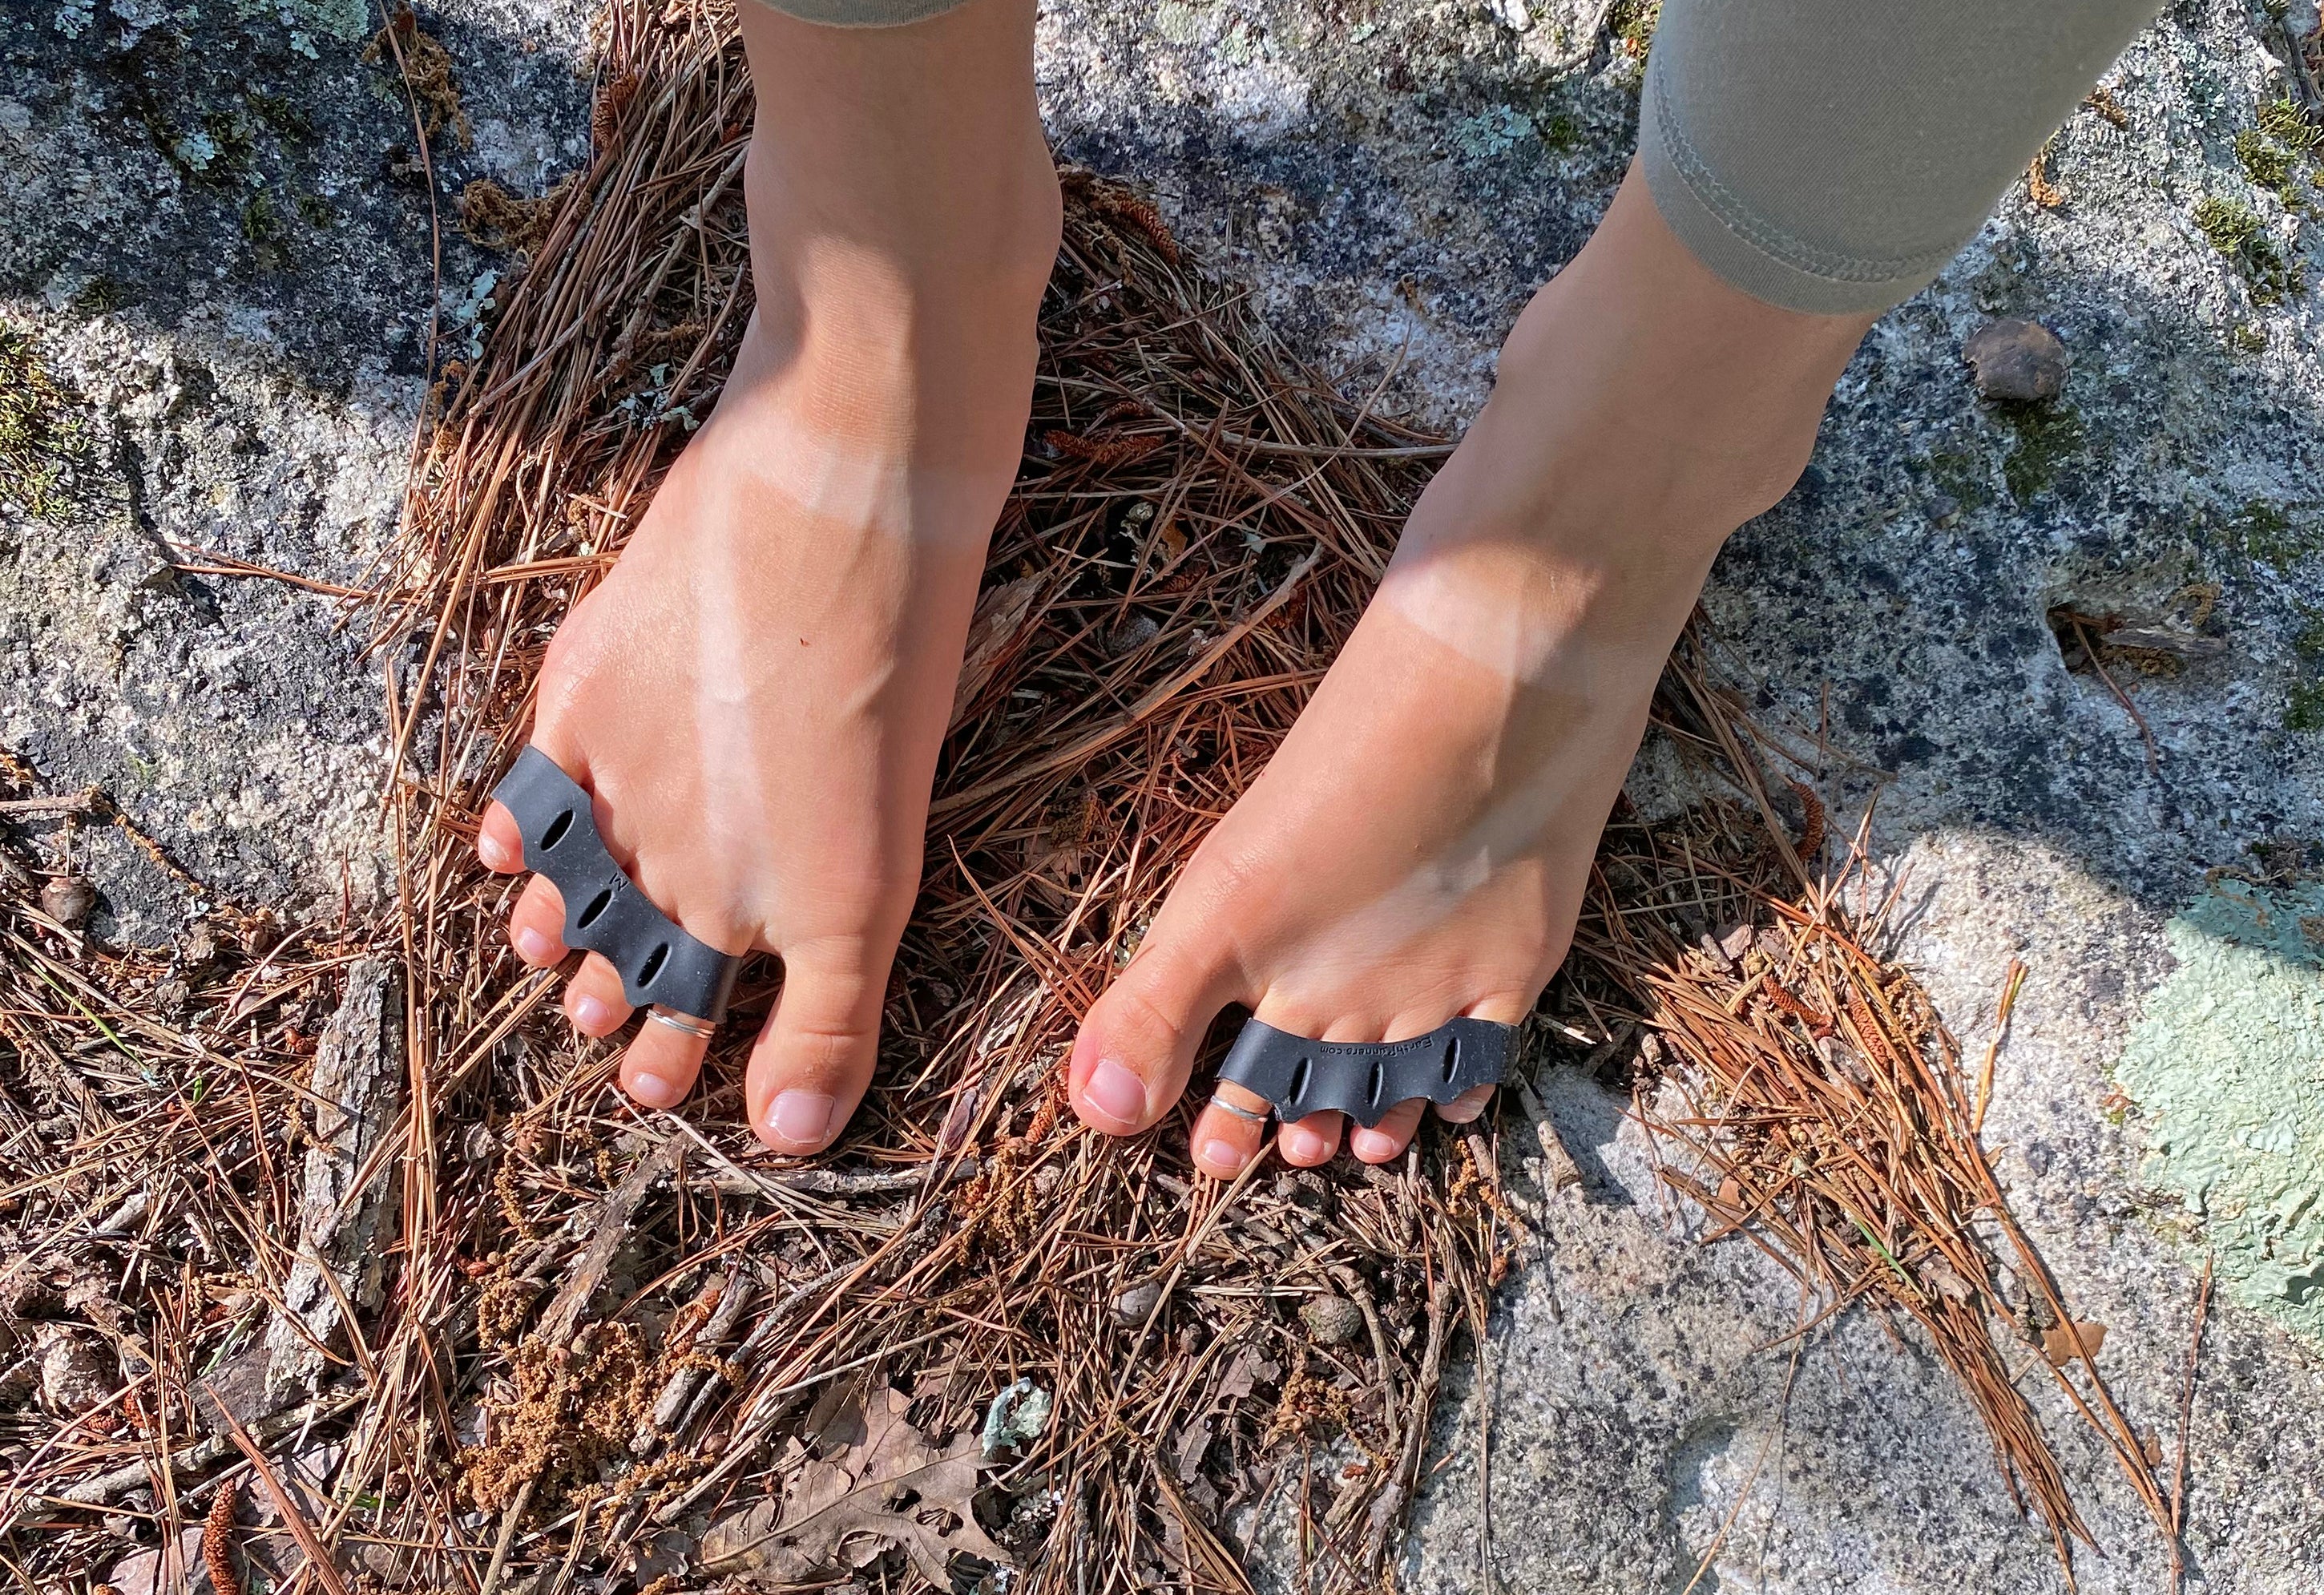 Earth Runners - Toe spacers are an easy way to rehab your feet. Some of the  benefits of this convenient foot health tool include: 🔹Toe spacers align  the toes in a natural